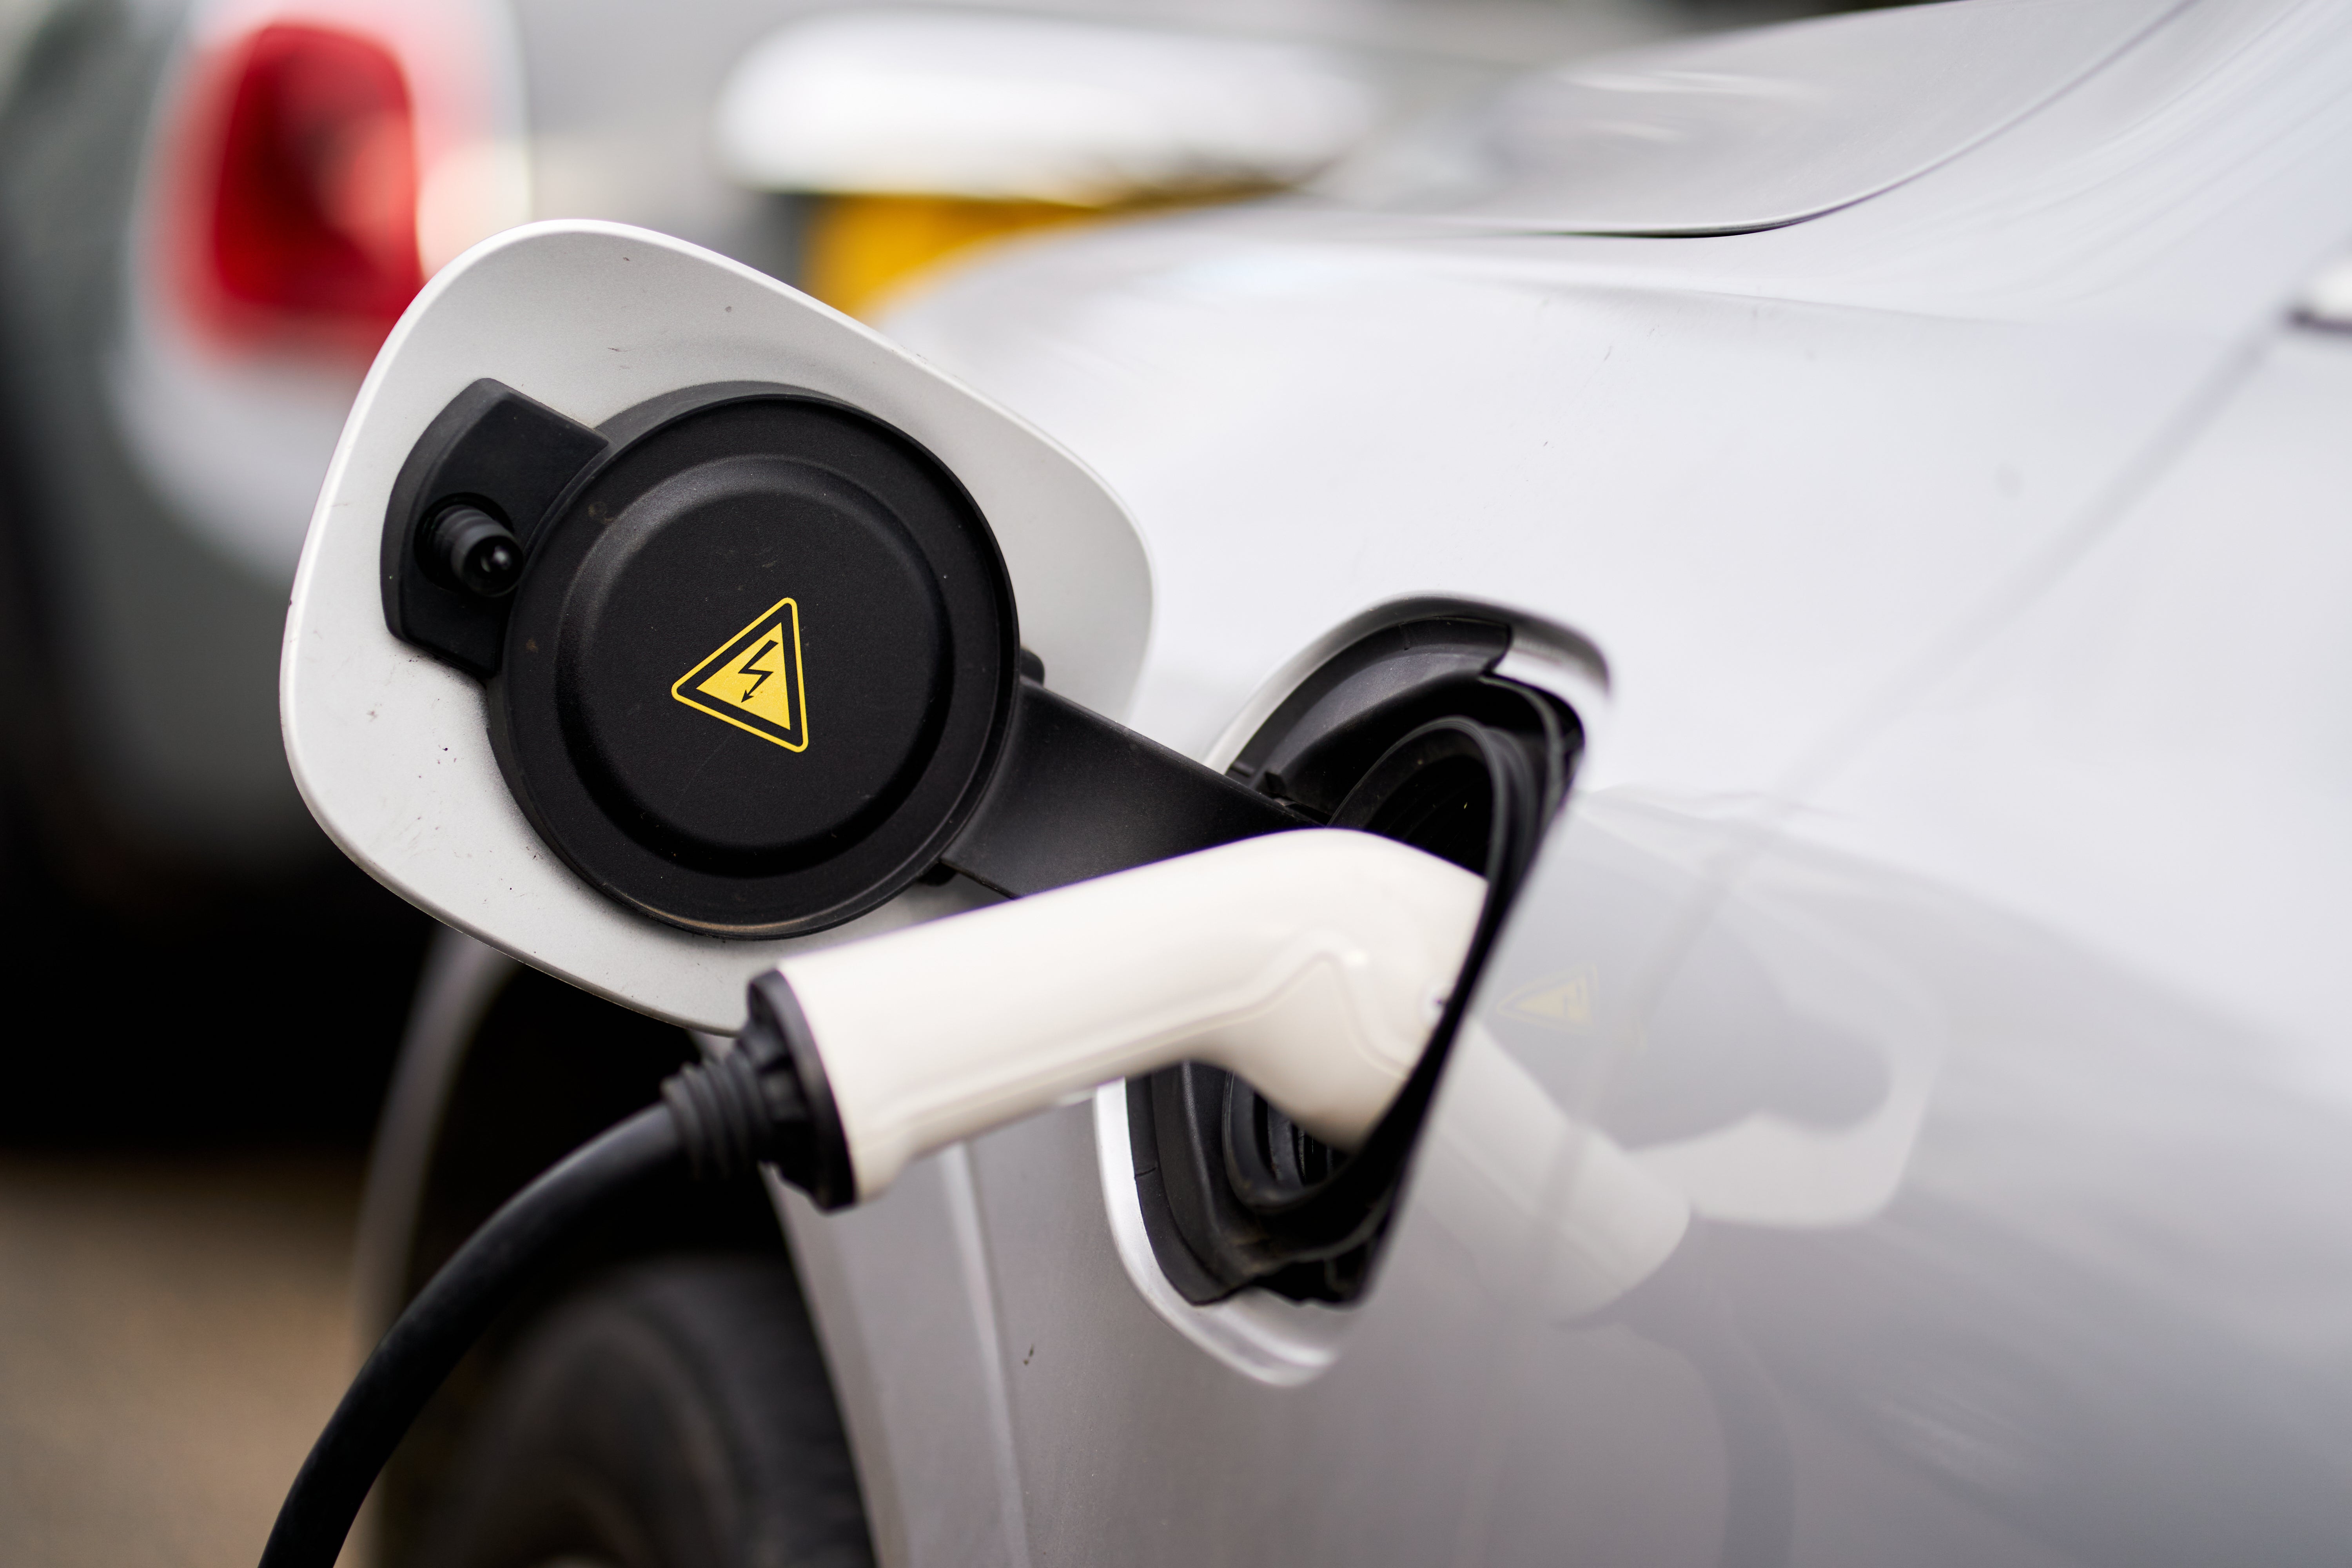 Soaring fuel prices mean the per mile cost of running an electric vehicle is catching up with petrol